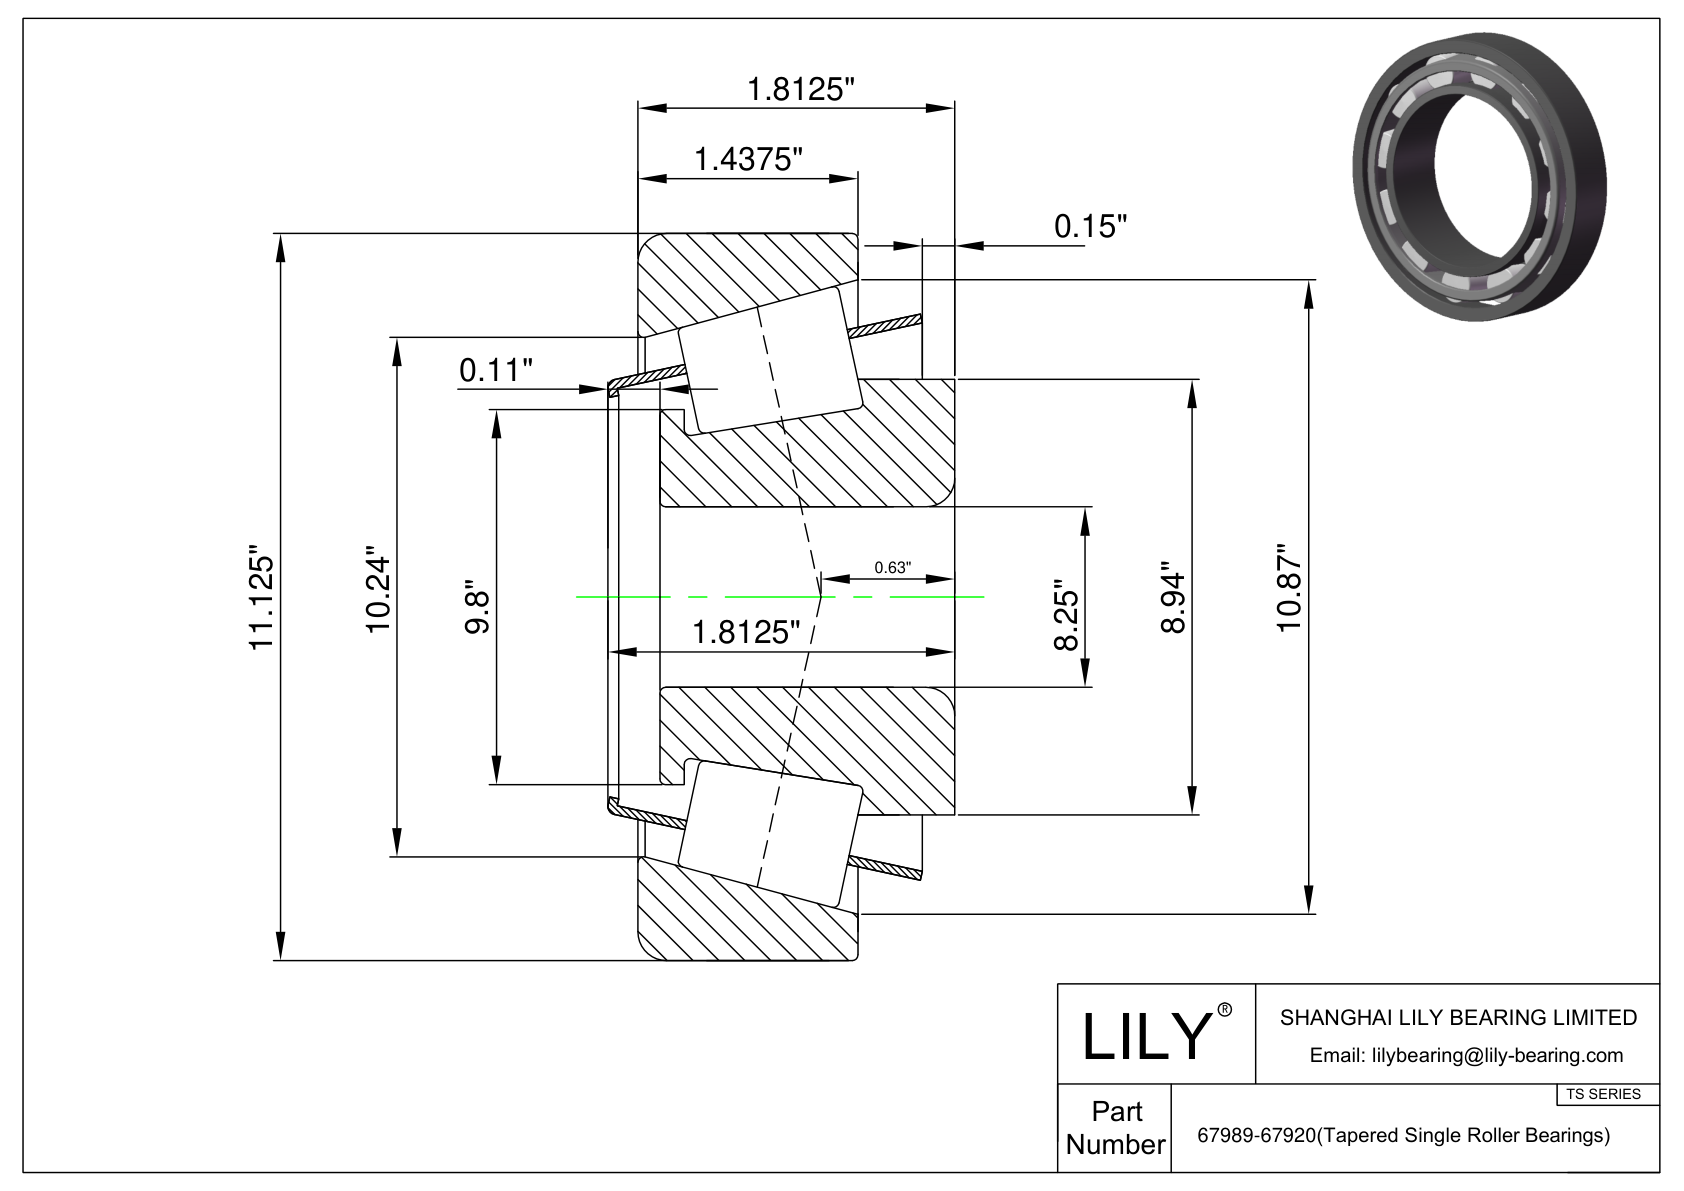 67989-67920 TS (Tapered Single Roller Bearings) (Imperial) cad drawing